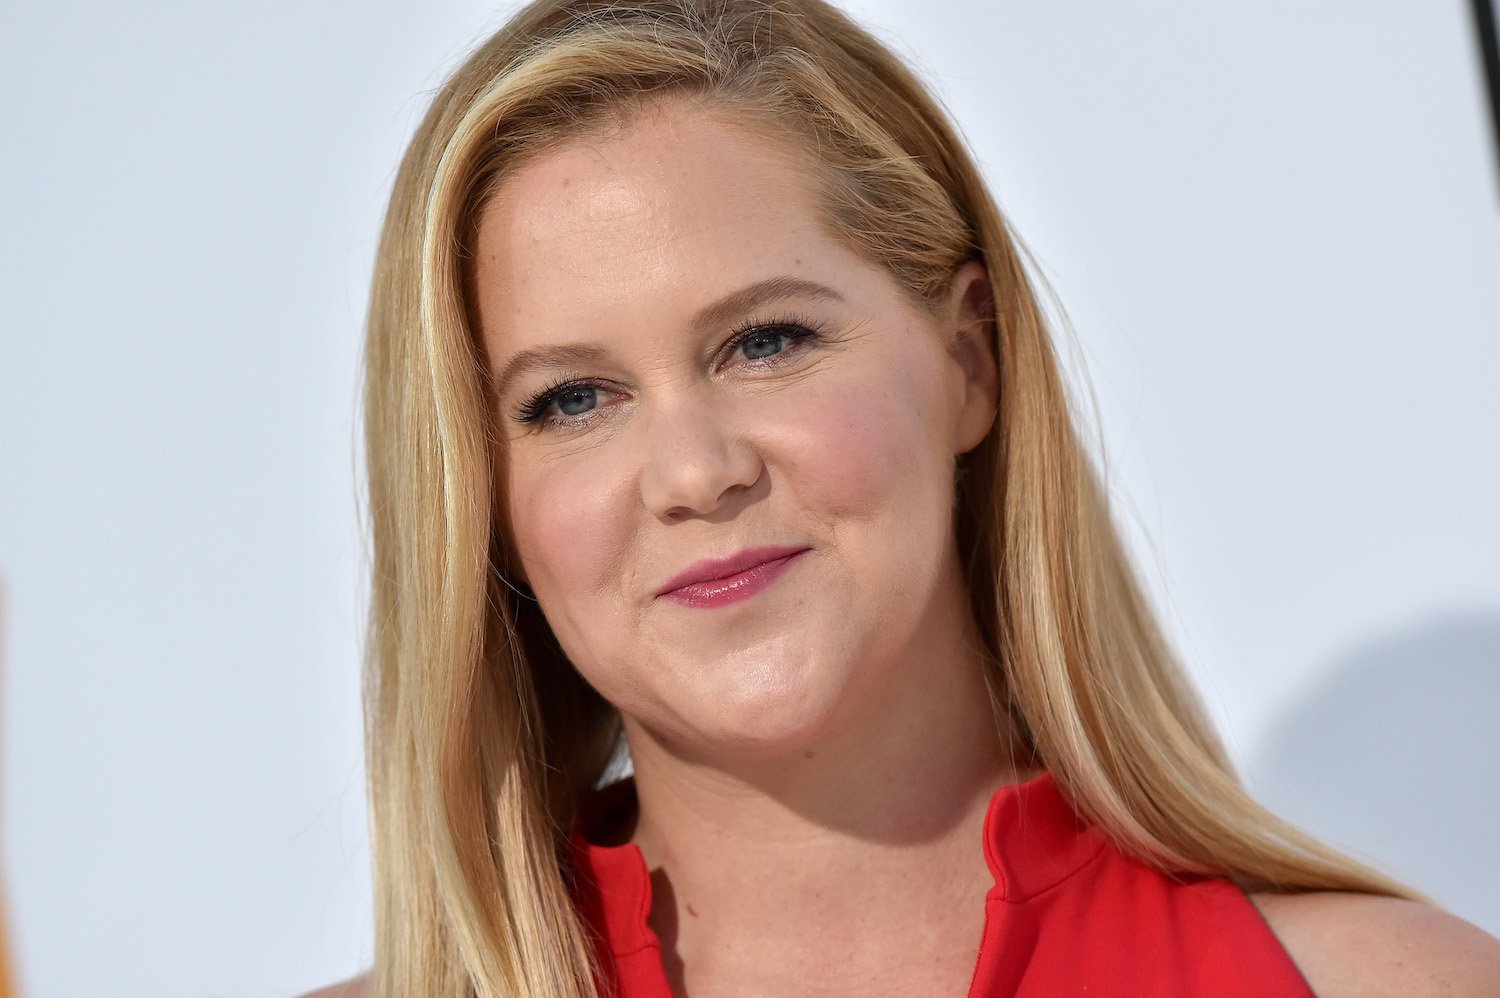 Amy Schumer at the premiere of 'I Feel Pretty'